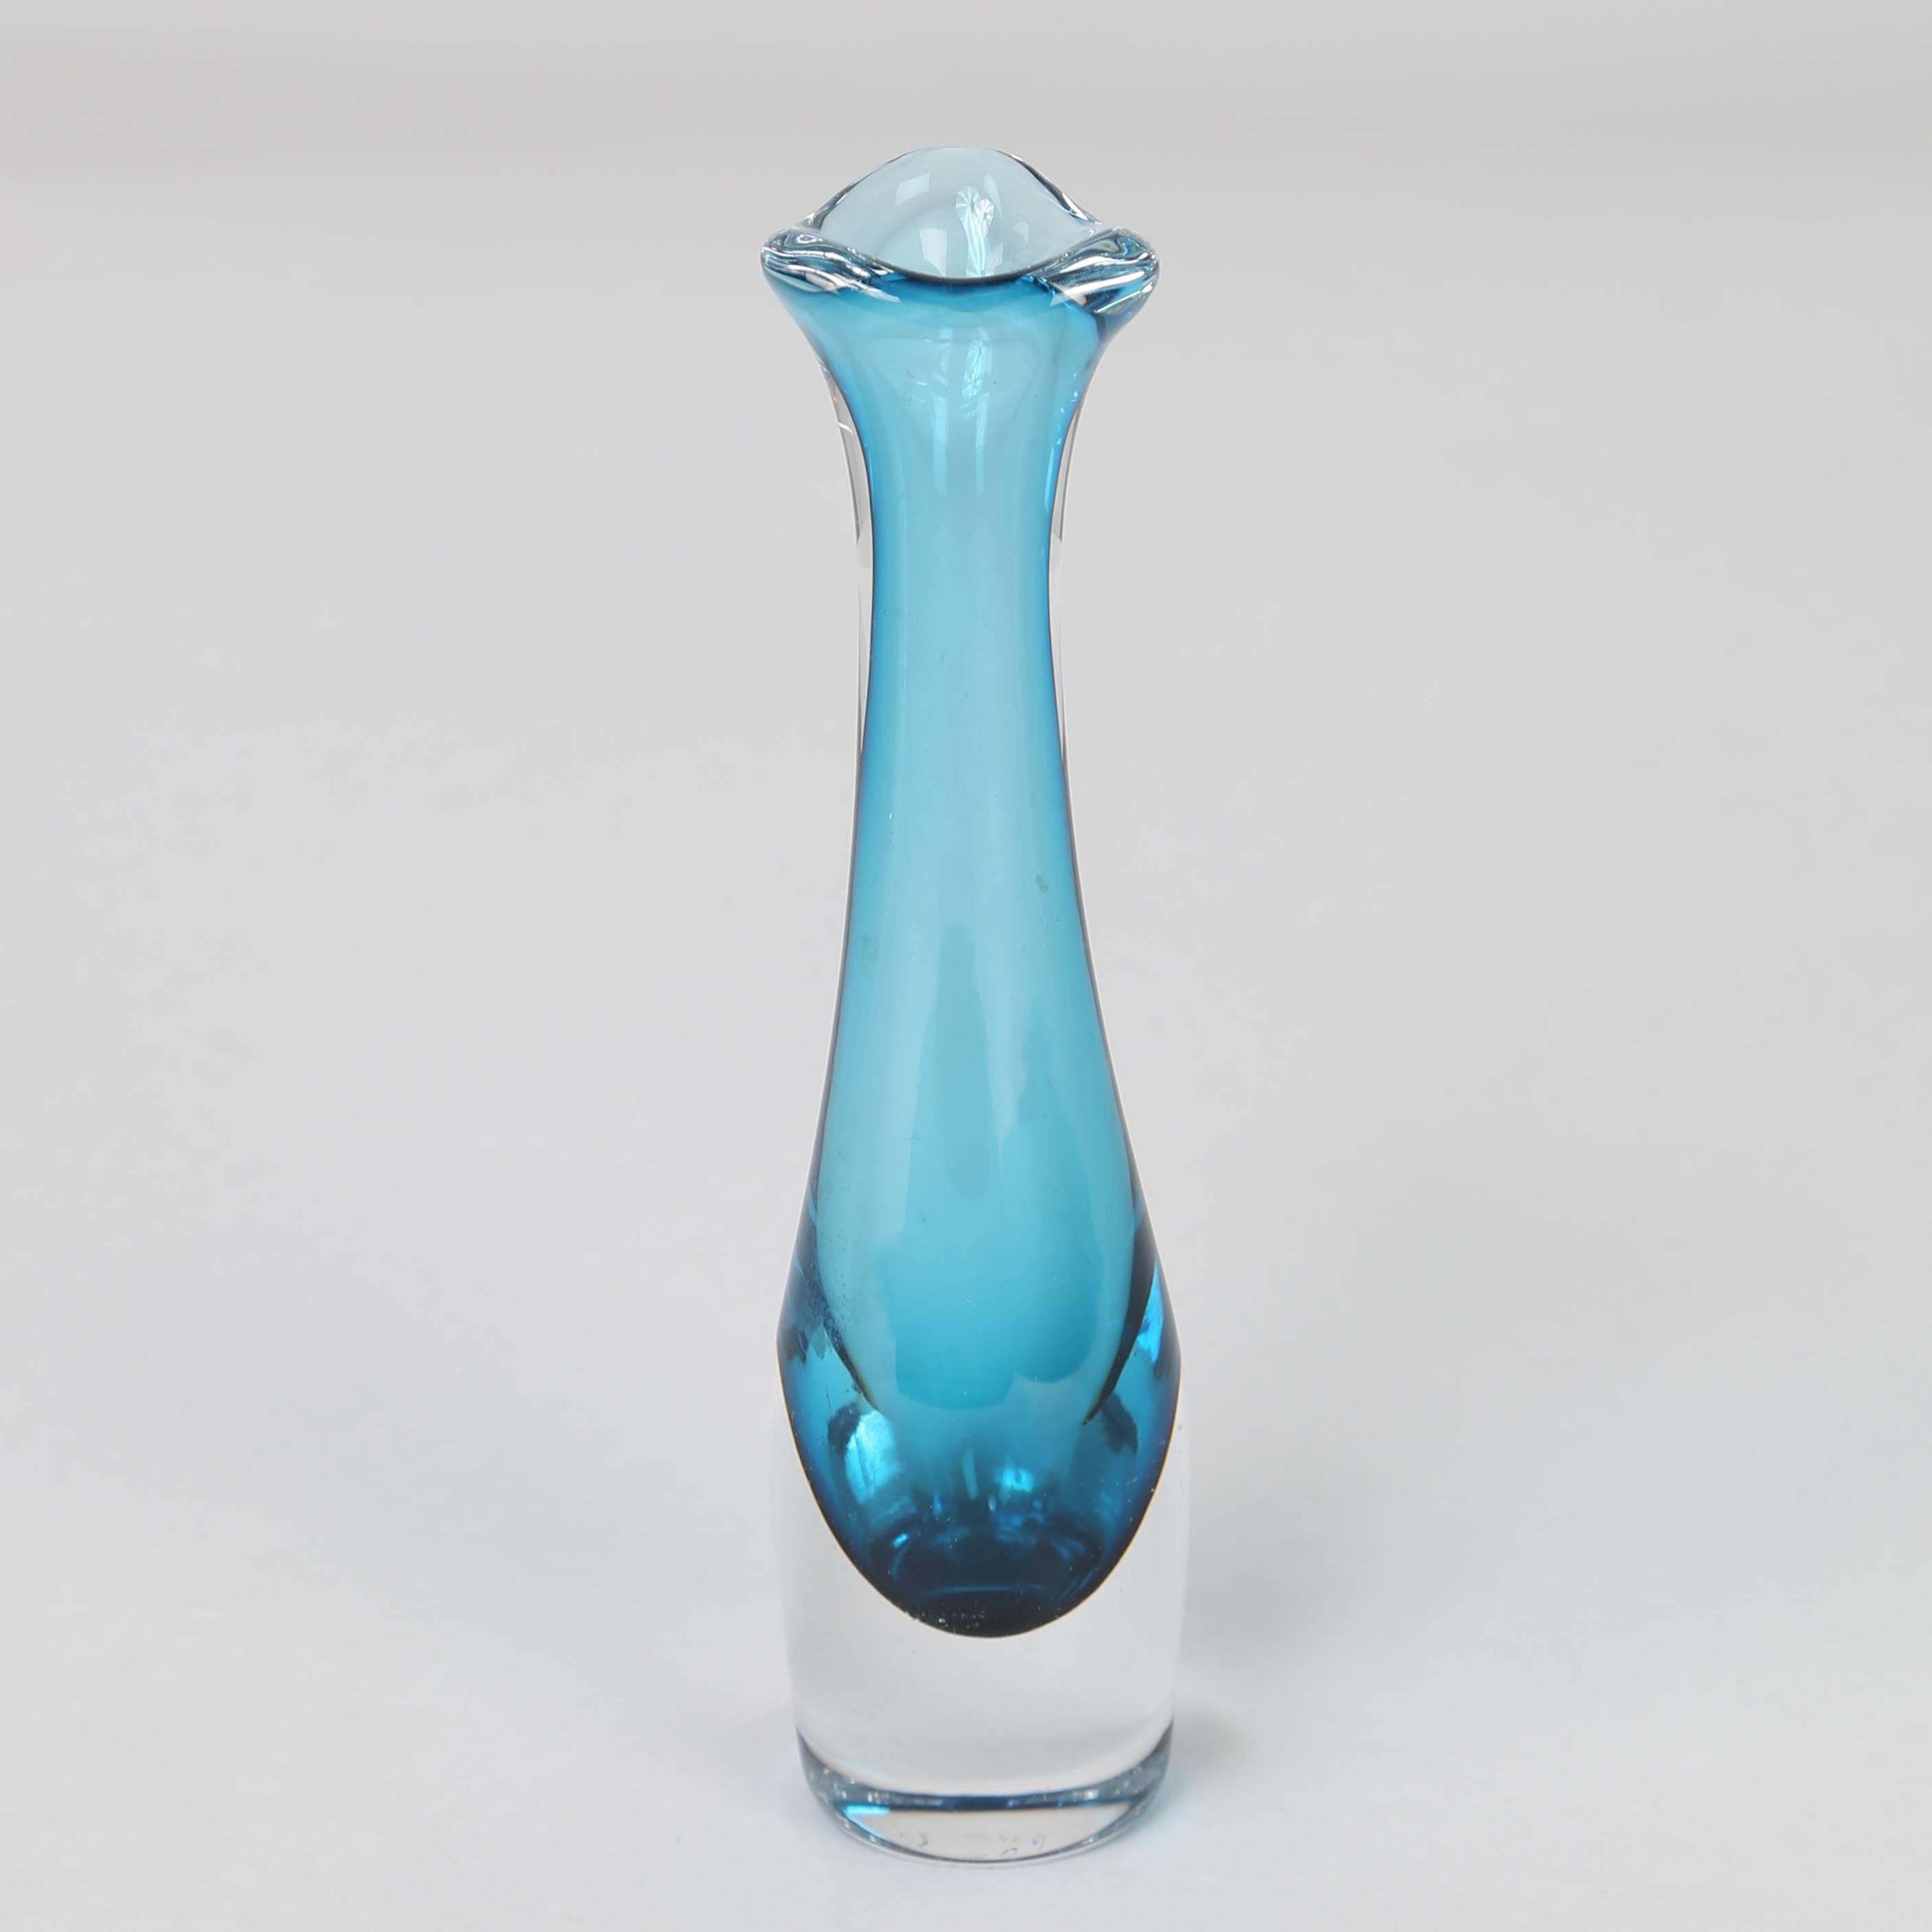 Swedish Collection of 1960s Blue-Glass “Selena” Vases by Sven Palmqvist for Orrefors